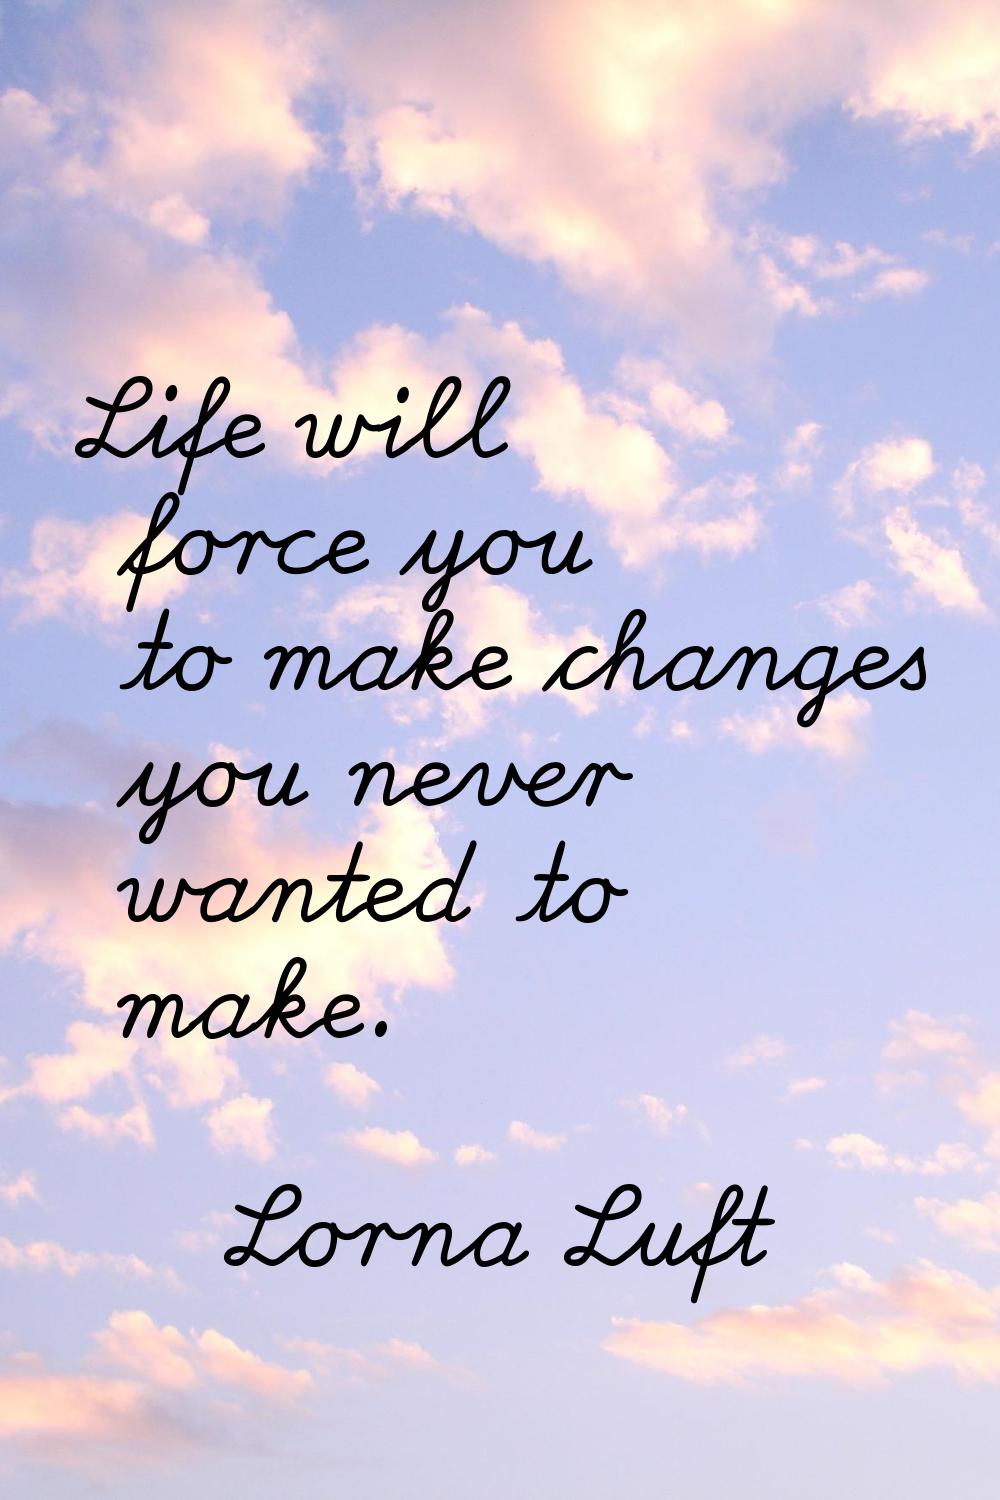 Life will force you to make changes you never wanted to make.